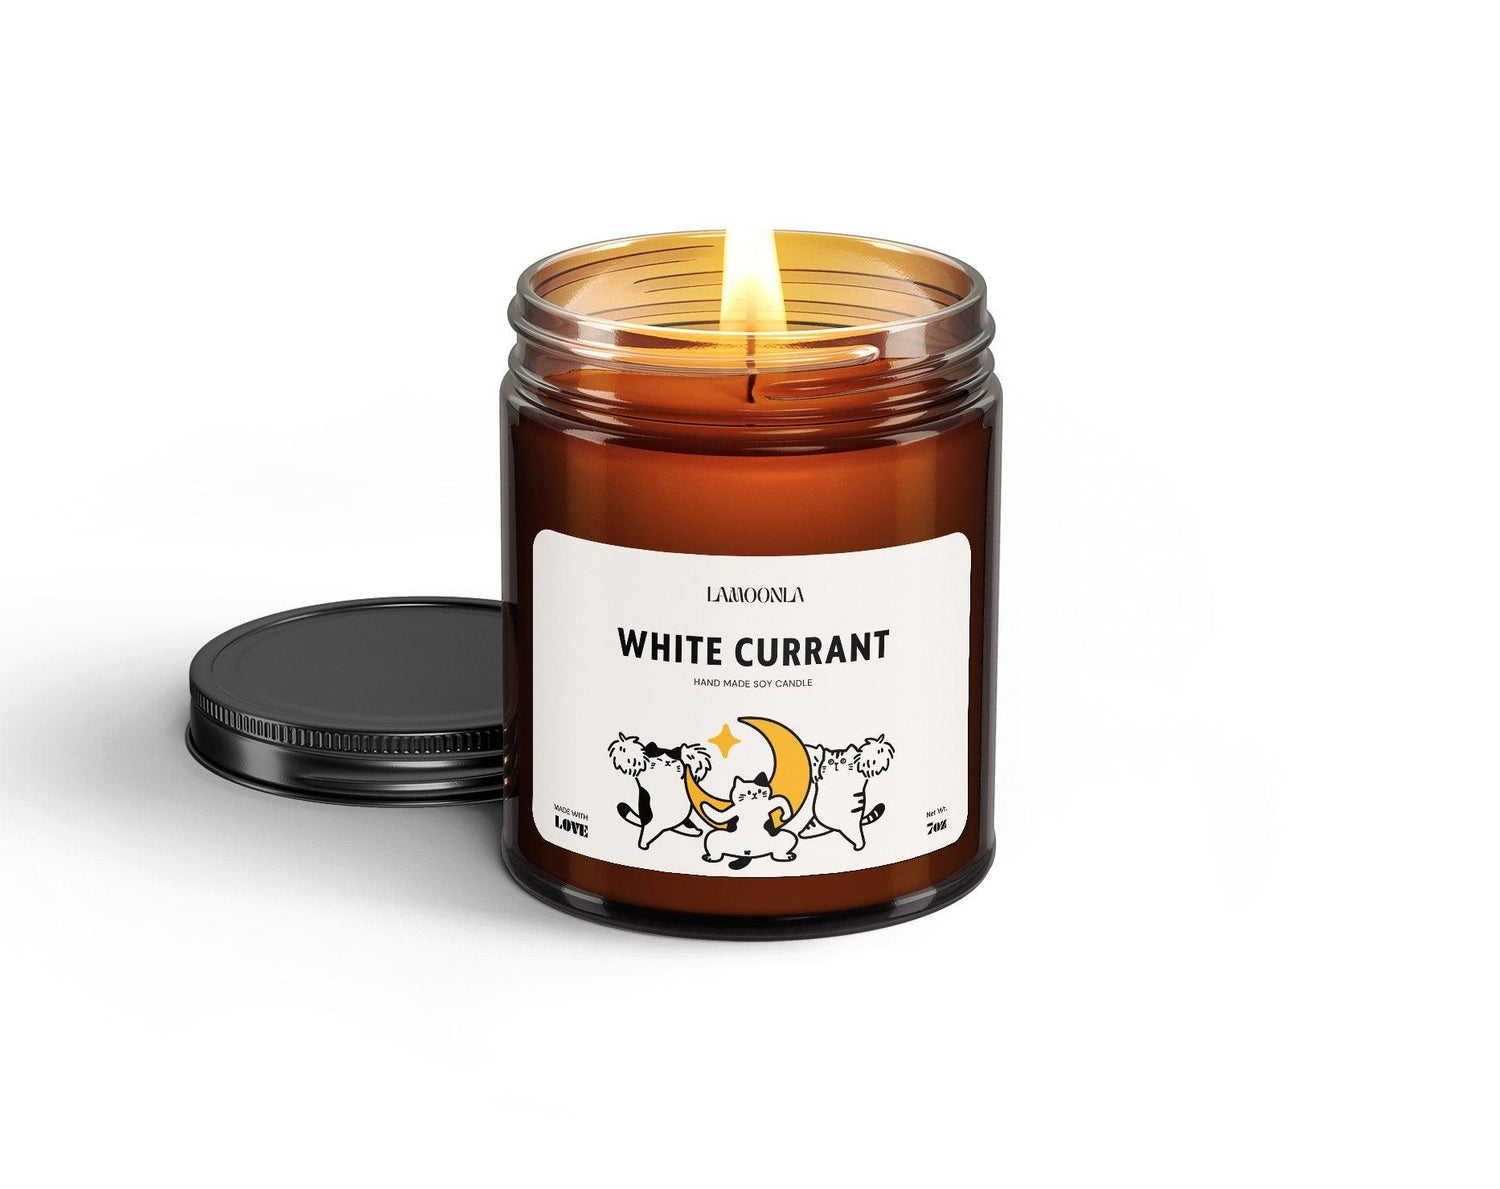 Indulge in Lamoonla - White Currant Candle, a soy wax creation handmade with care in the USA. Escape into the rich aroma of currant, lemon peel, geranium, juniper, peppermint.  #HandmadeCandle #SoyWax #MadeInUSA